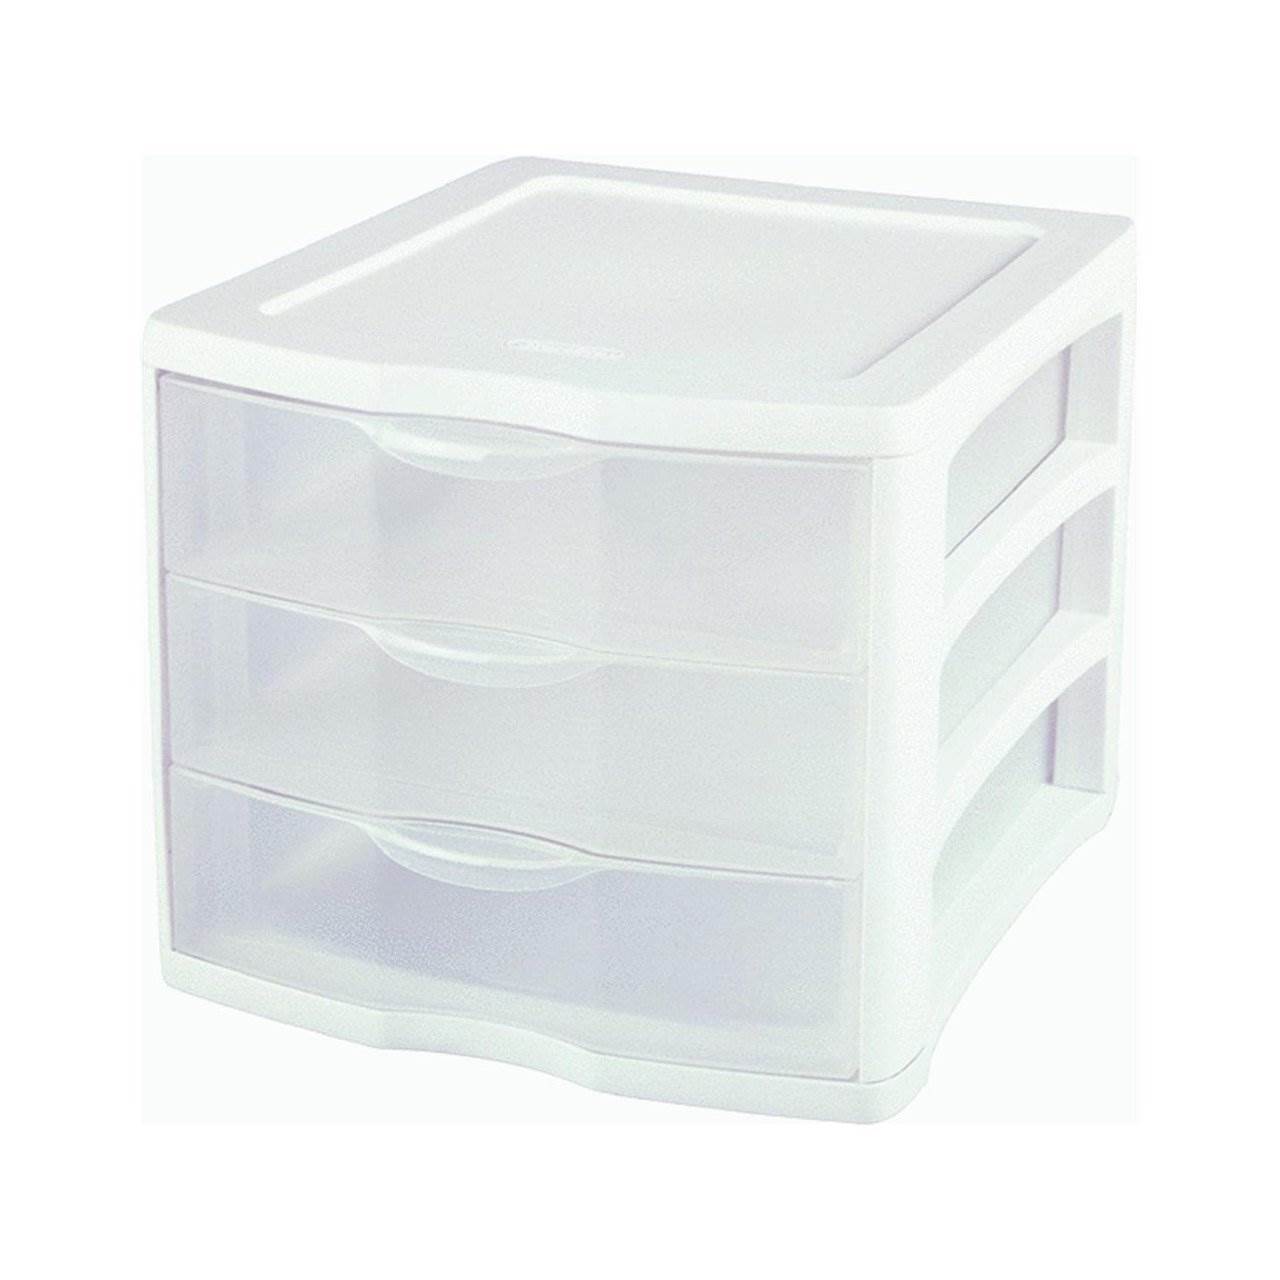 Sterilite Corporation 2-Pack 3-Drawers Brown Stackable Plastic